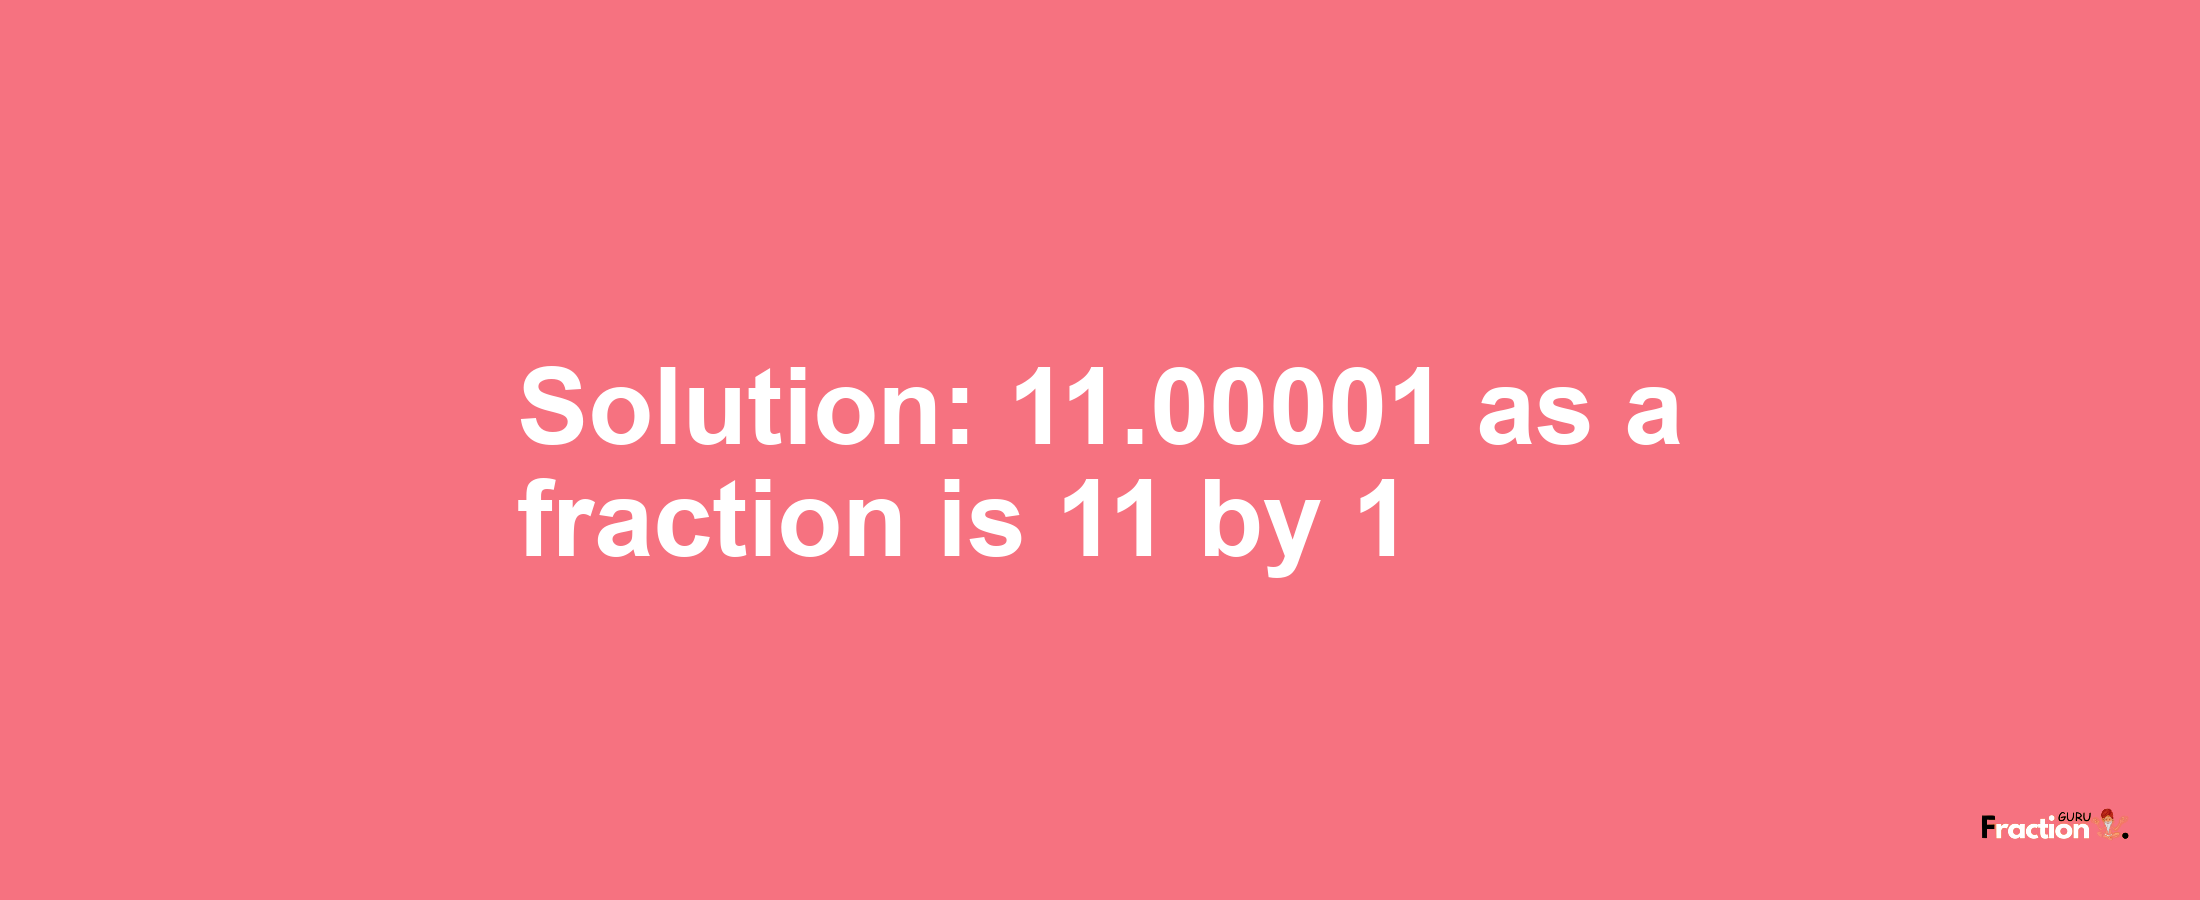 Solution:11.00001 as a fraction is 11/1